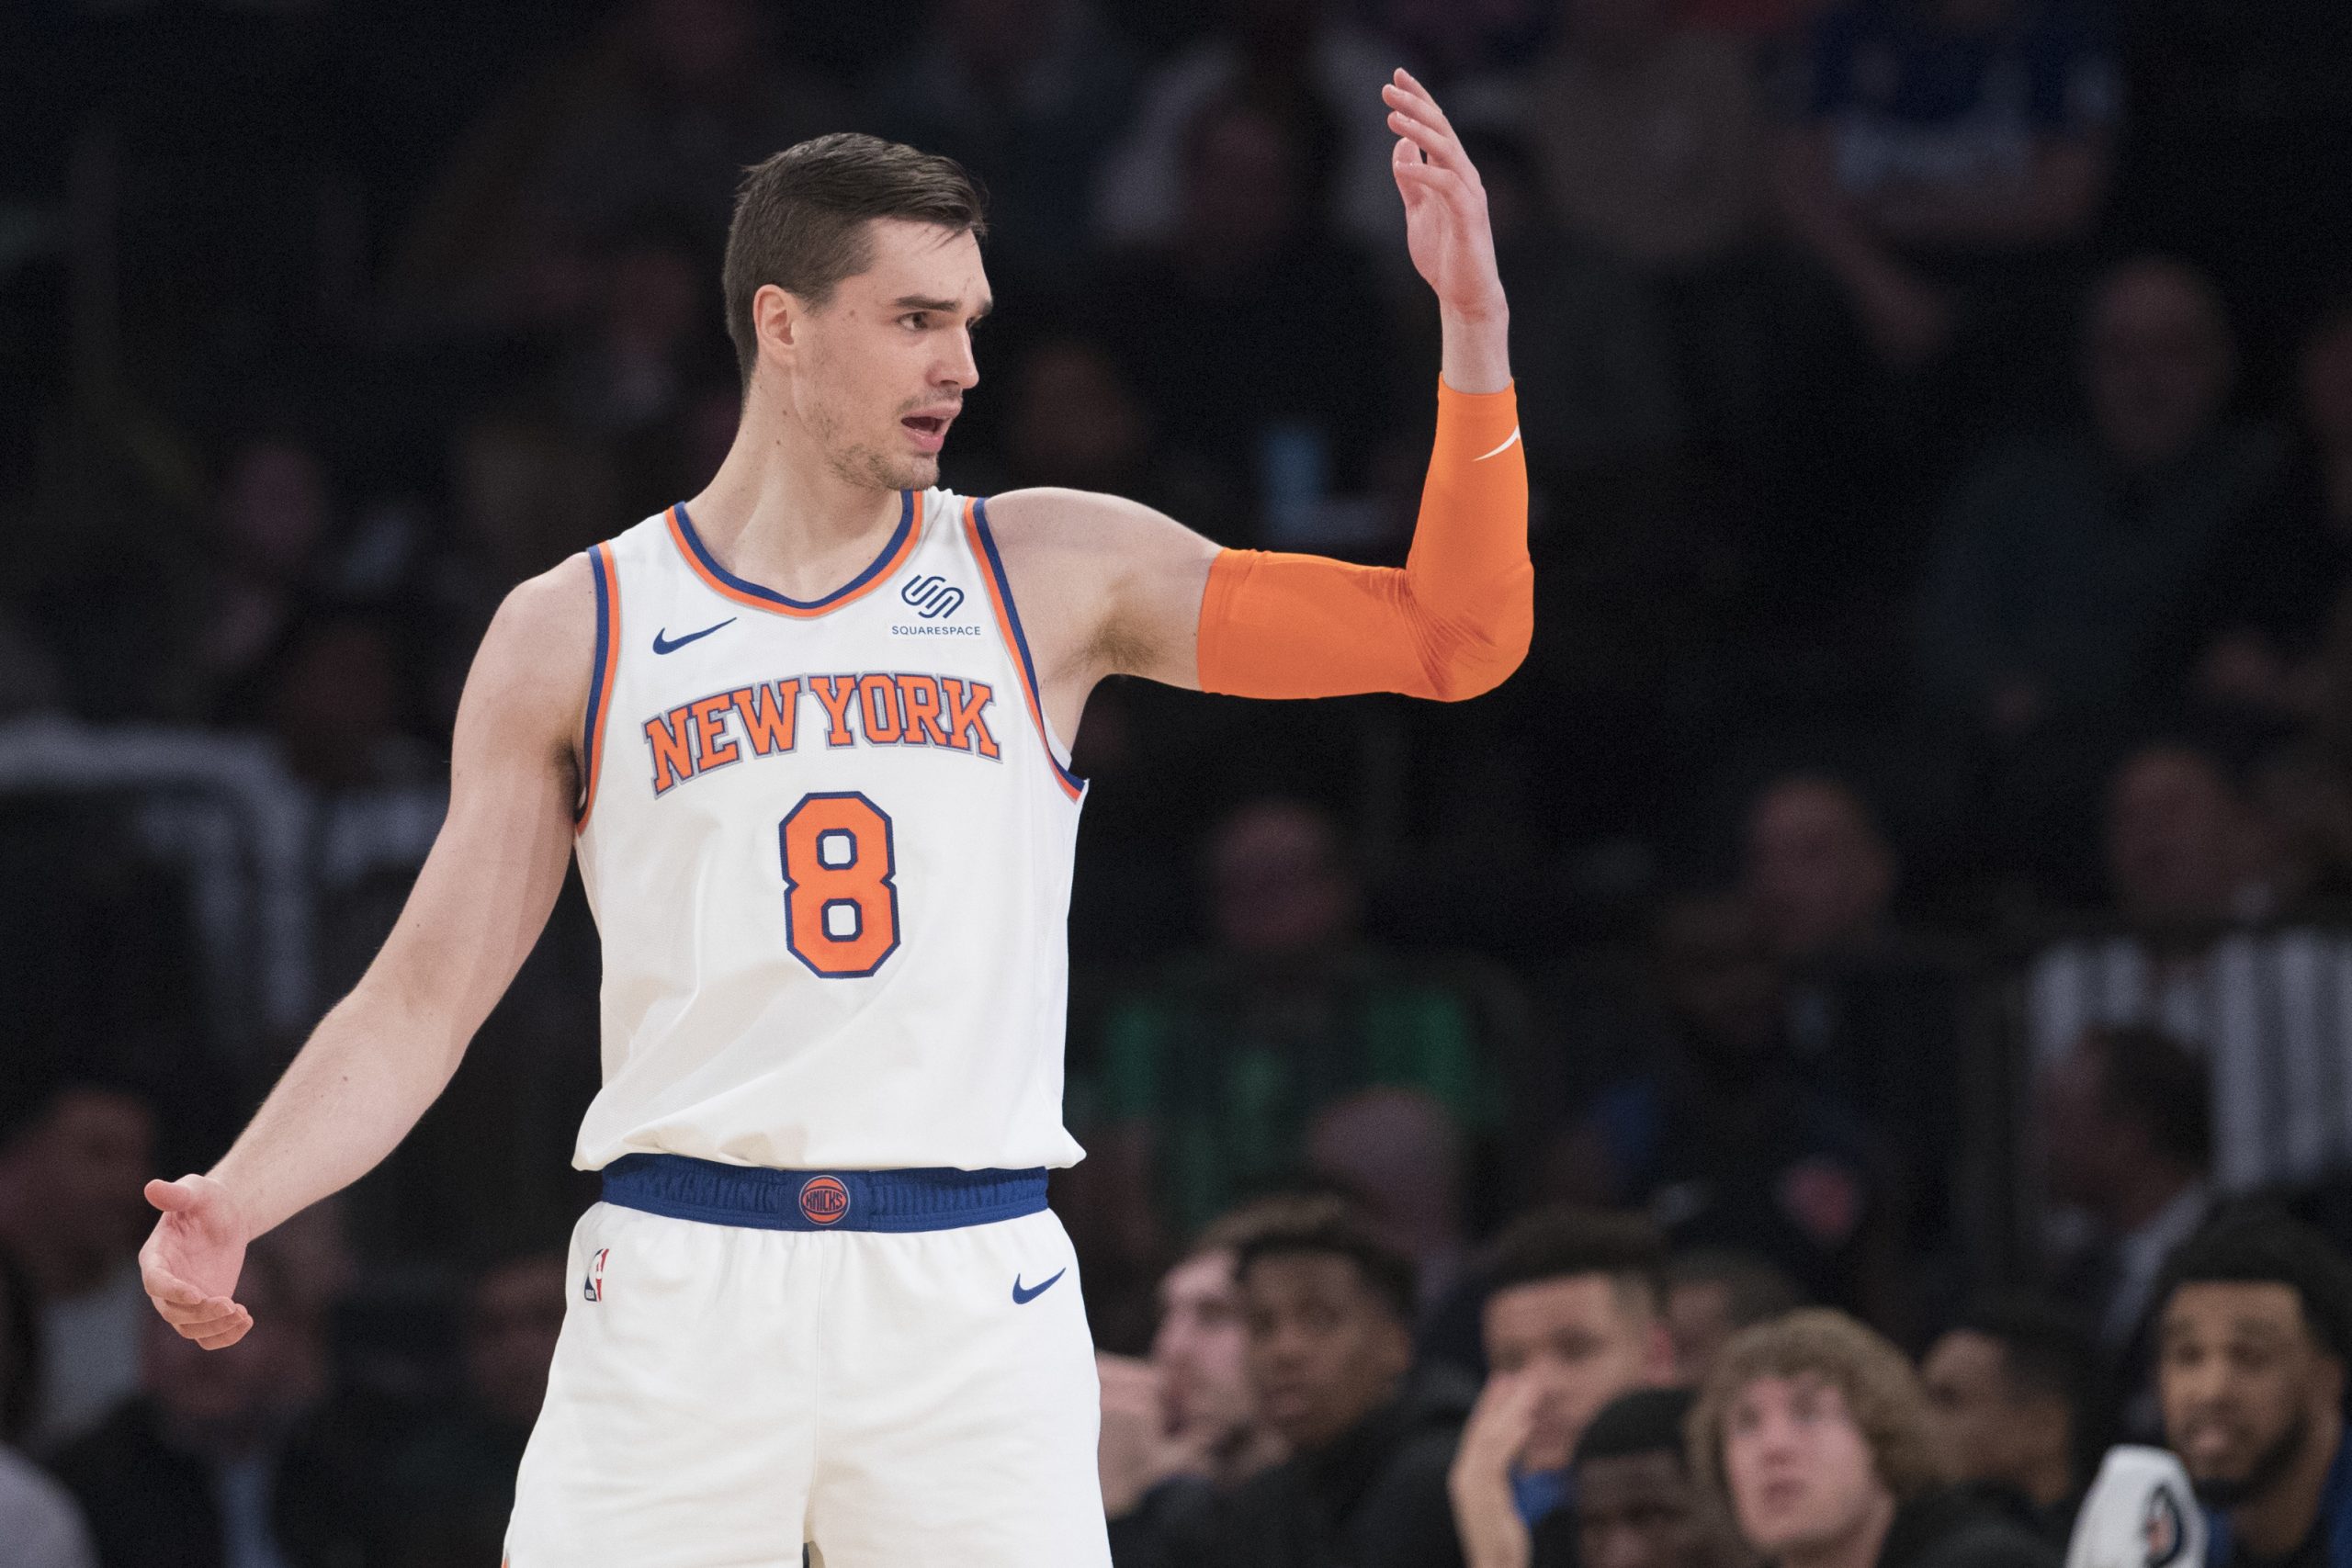 Former top draft pick, Mario Hezonja slammed the league and everything it stands for when vowing that he will never return